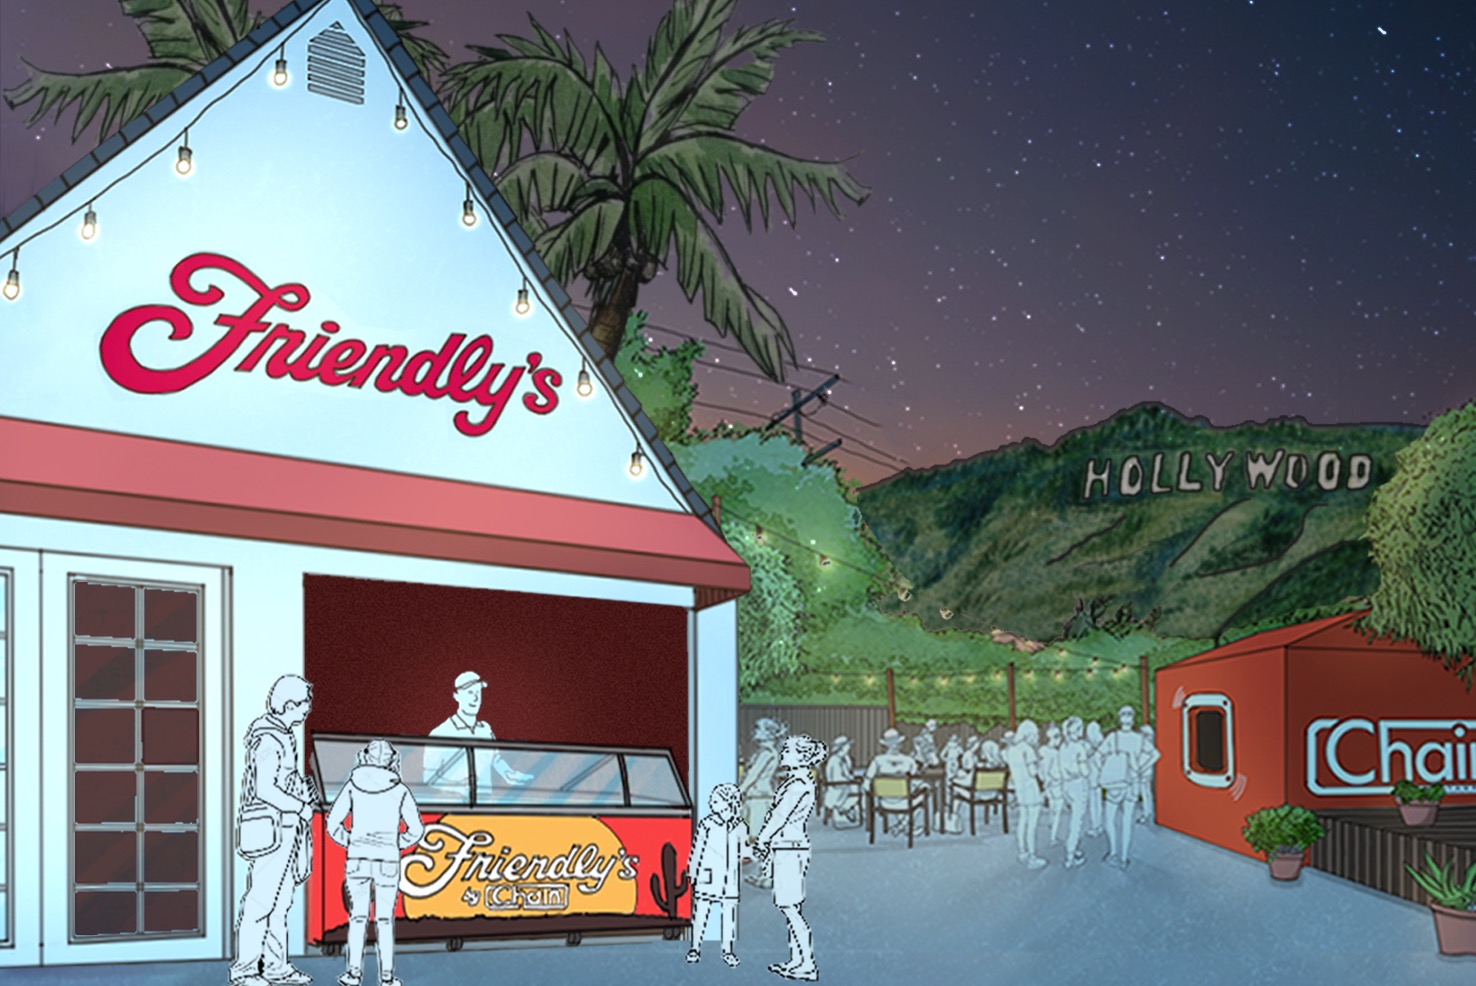 An illustration of East Coast ice cream parlor Friendly’s, with the Hollywood sign in the background.